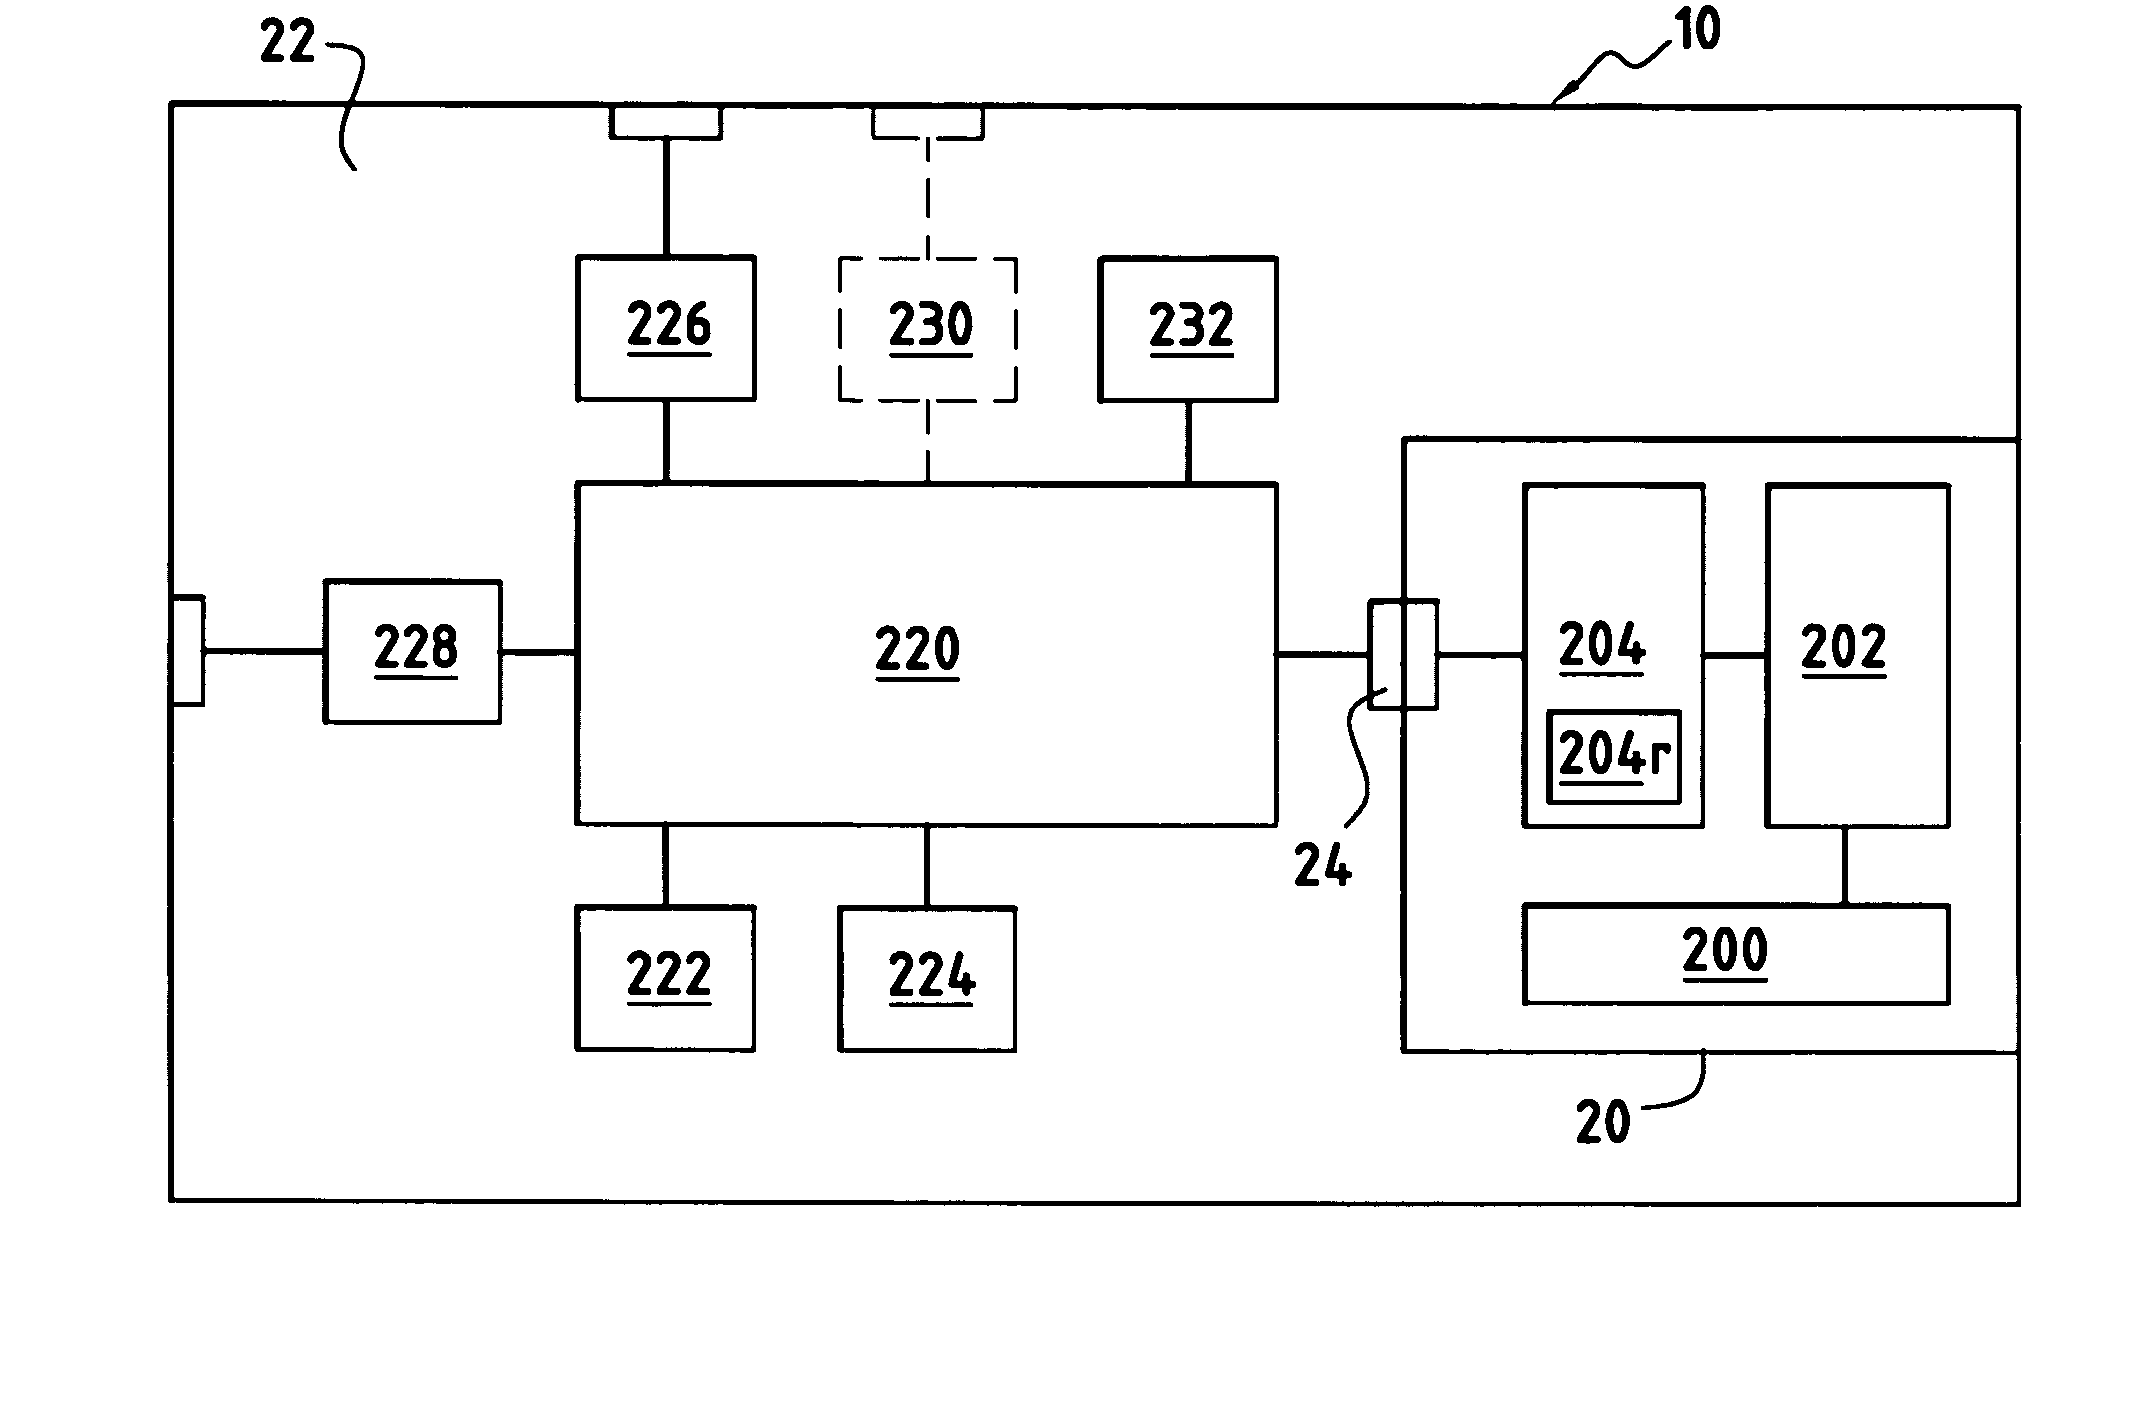 Postage meter system having a controlled level of ink